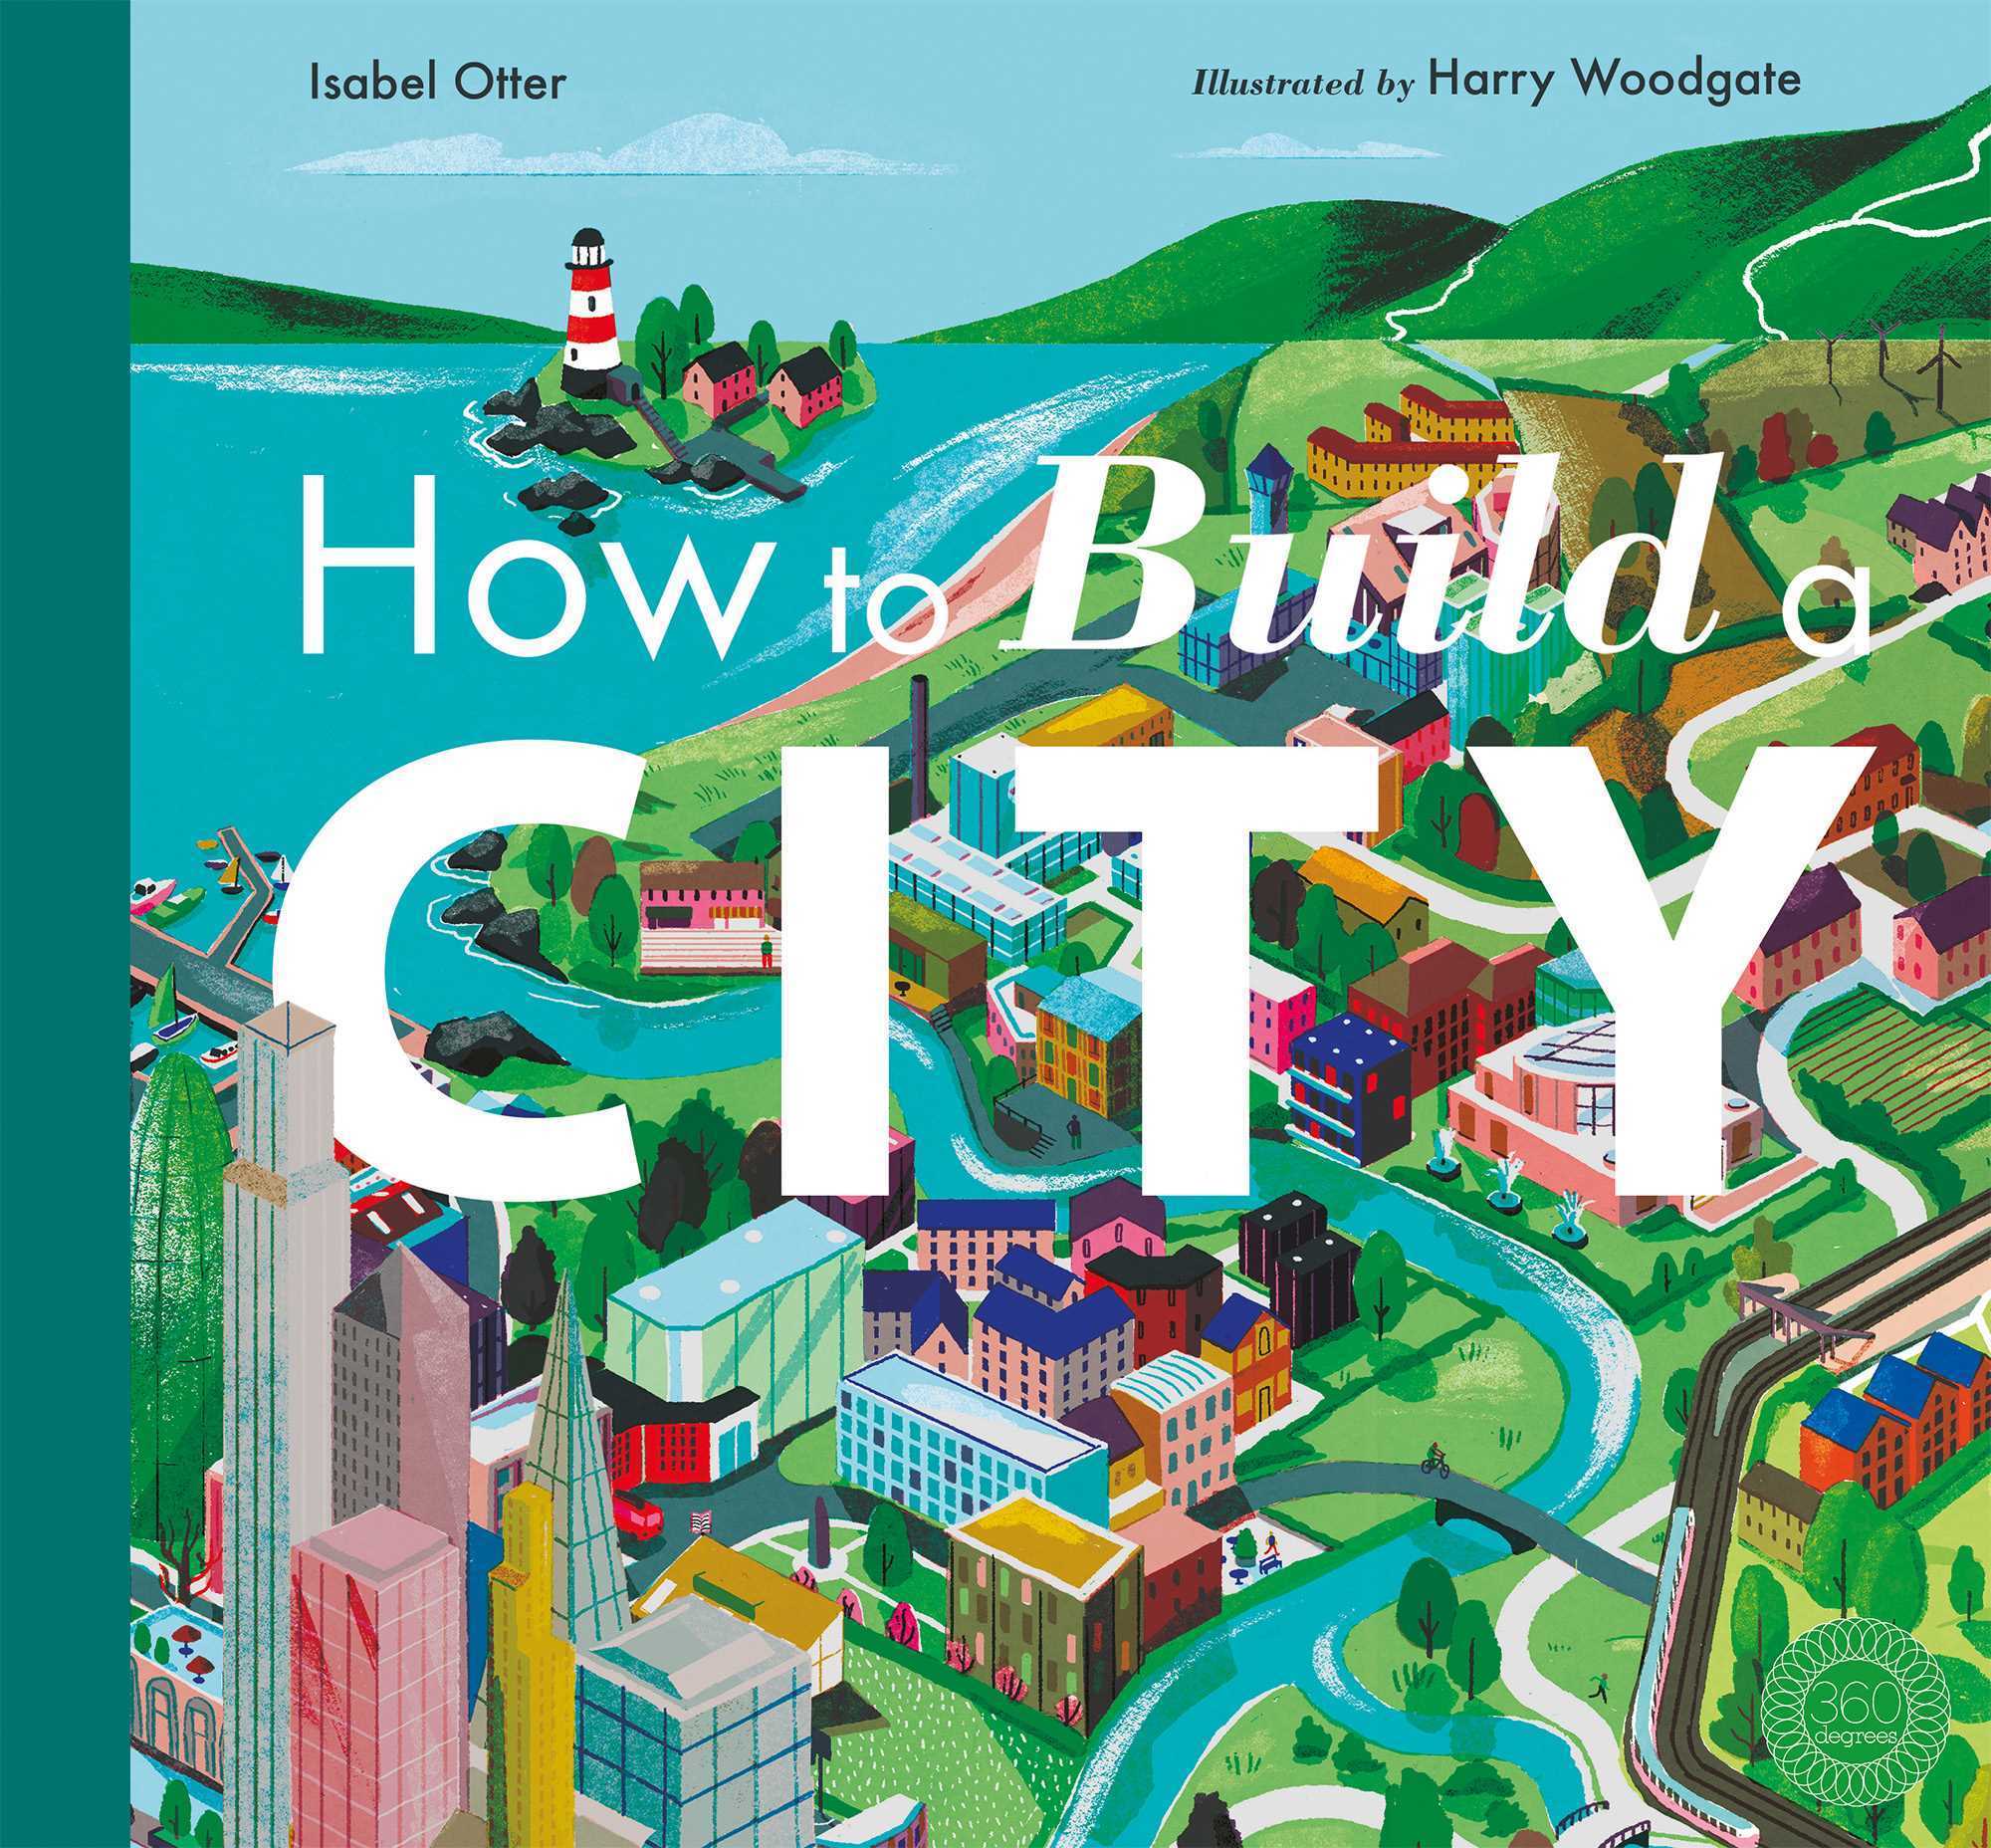 How to Build a City